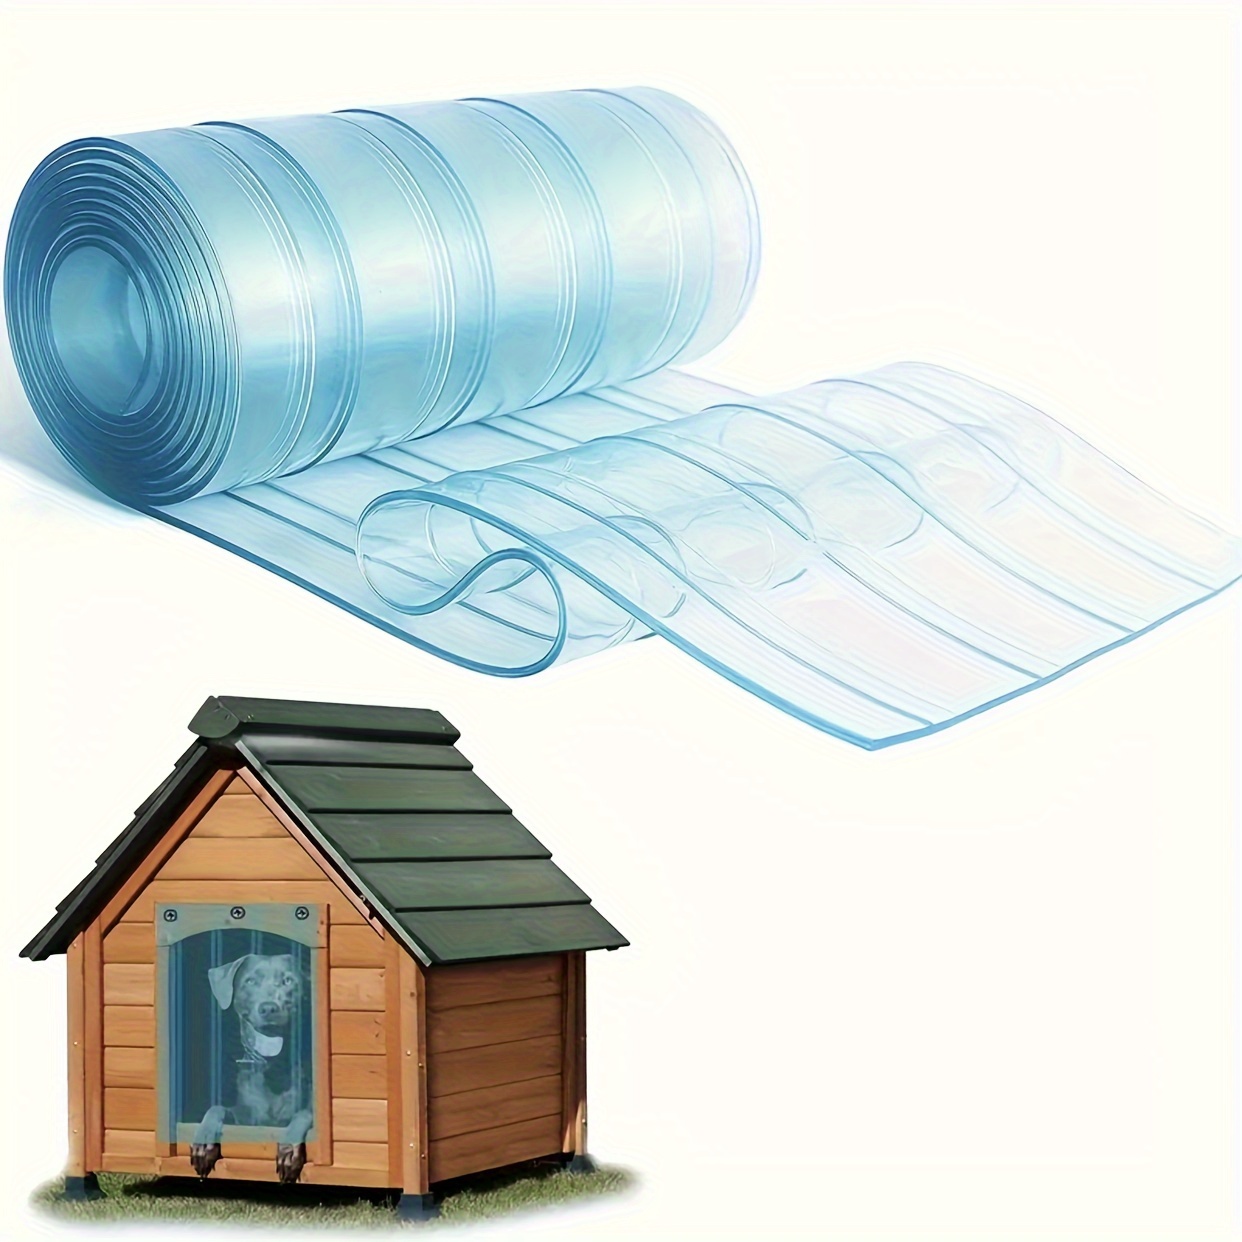 

1 Roll Pvc Strip Curtain For Pet House, Anti-static, Transparent, Windproof, Dust-proof Door Cover, Easy To Cut And Install